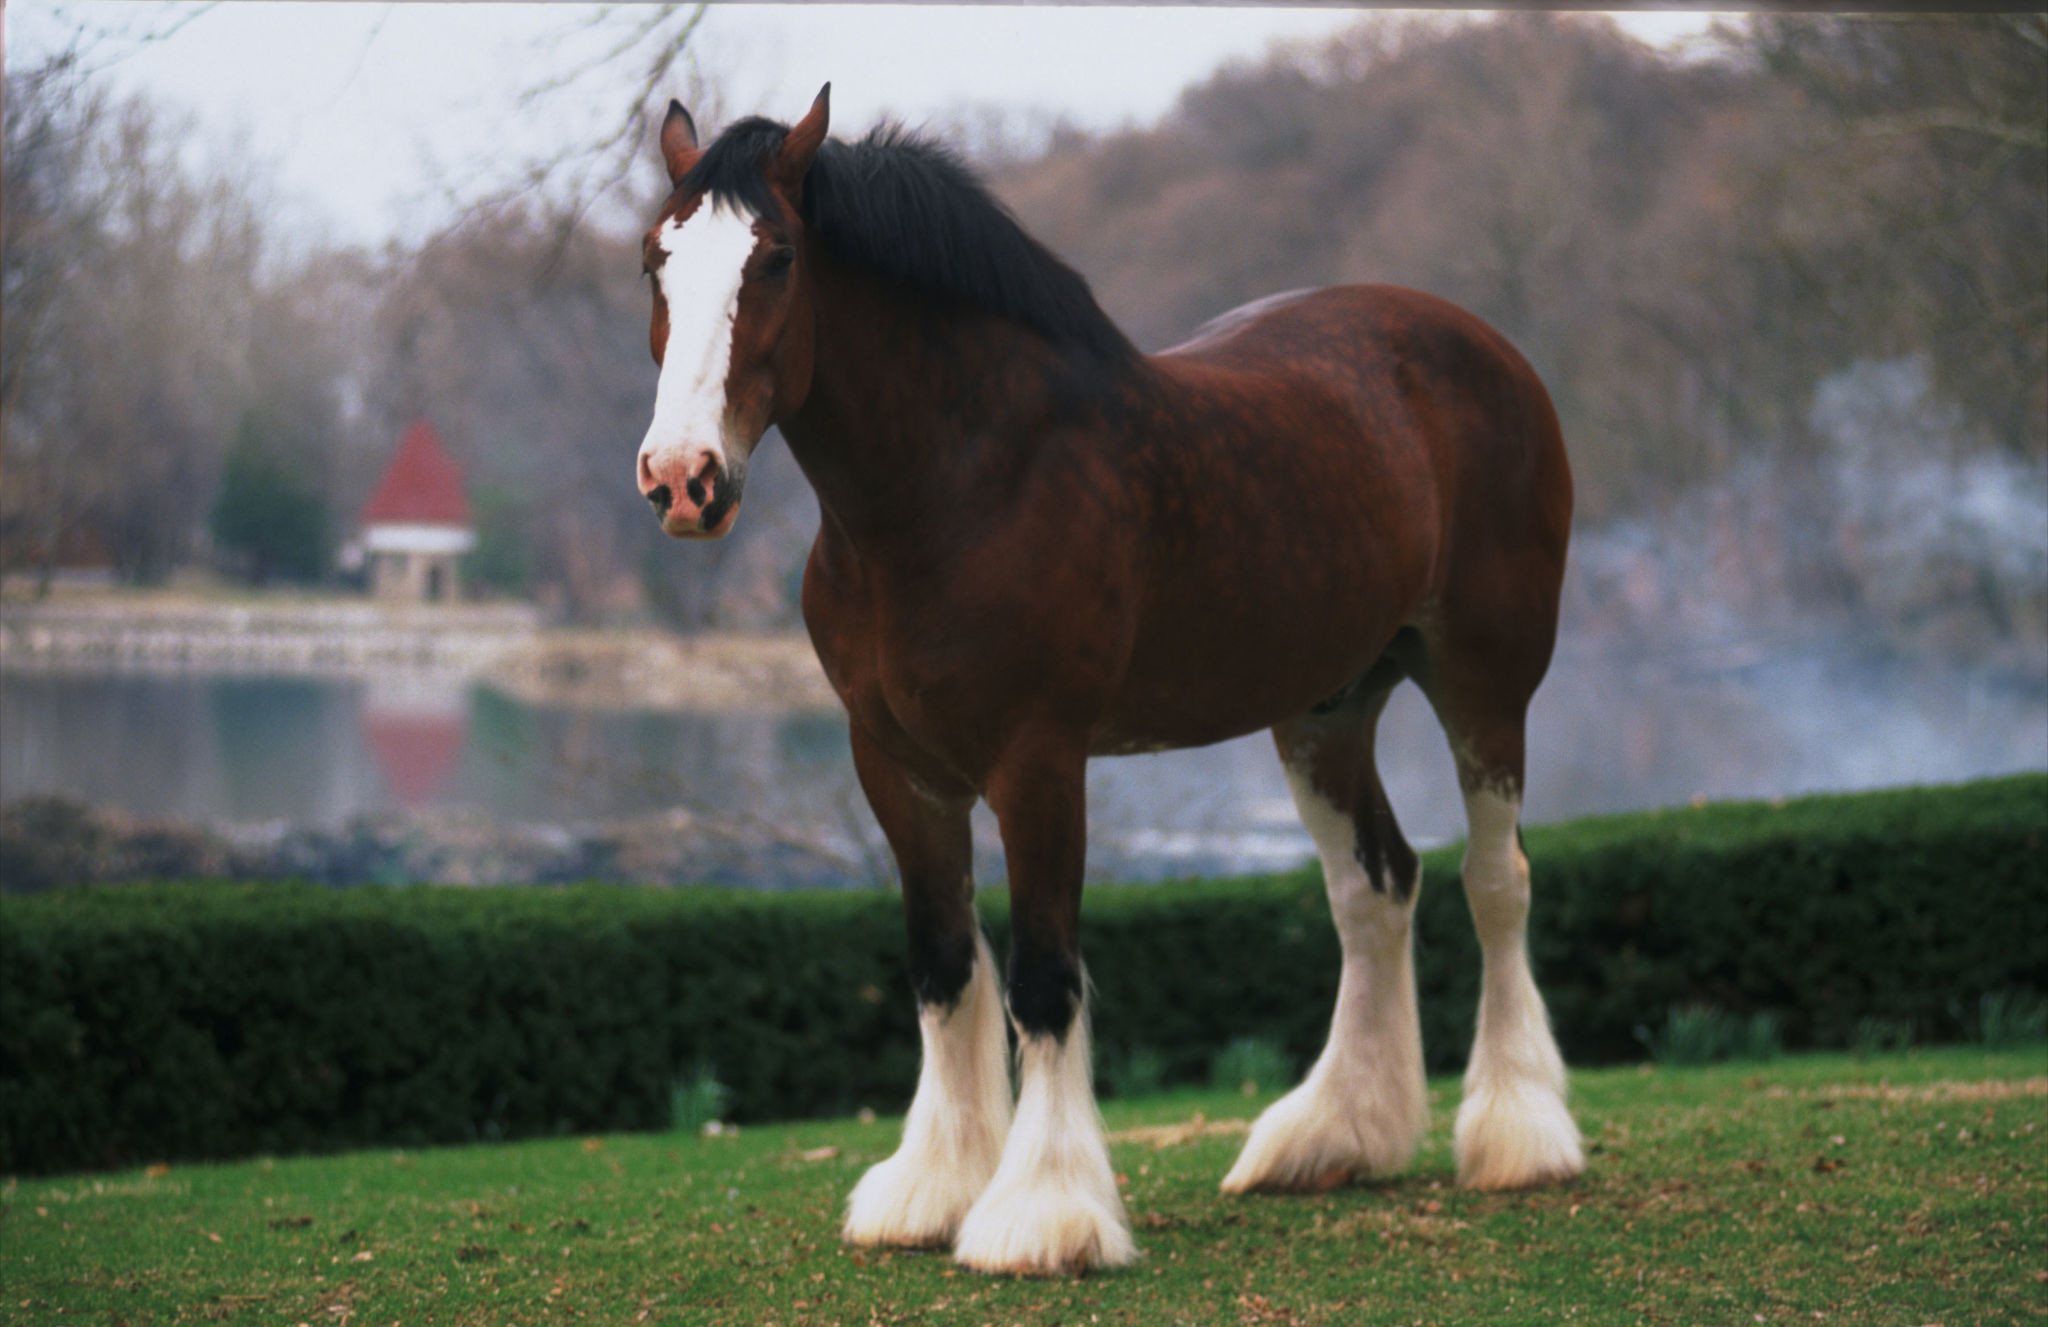 2048x1327 Budweiser Clydesdales Wallpaper Budweiser clydesdales image